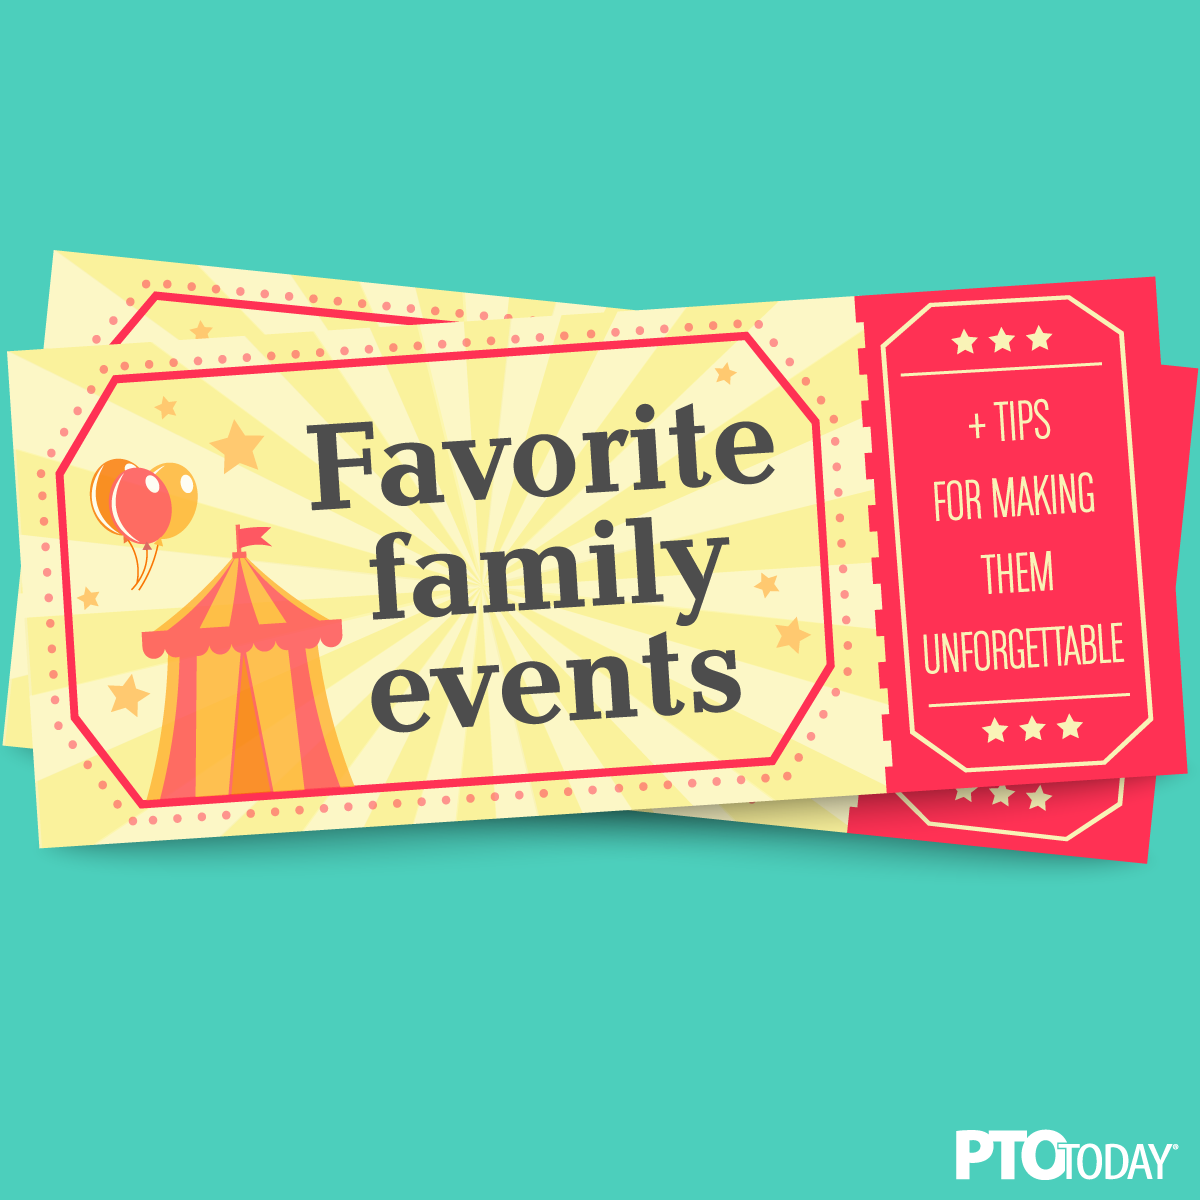 The school events you love most